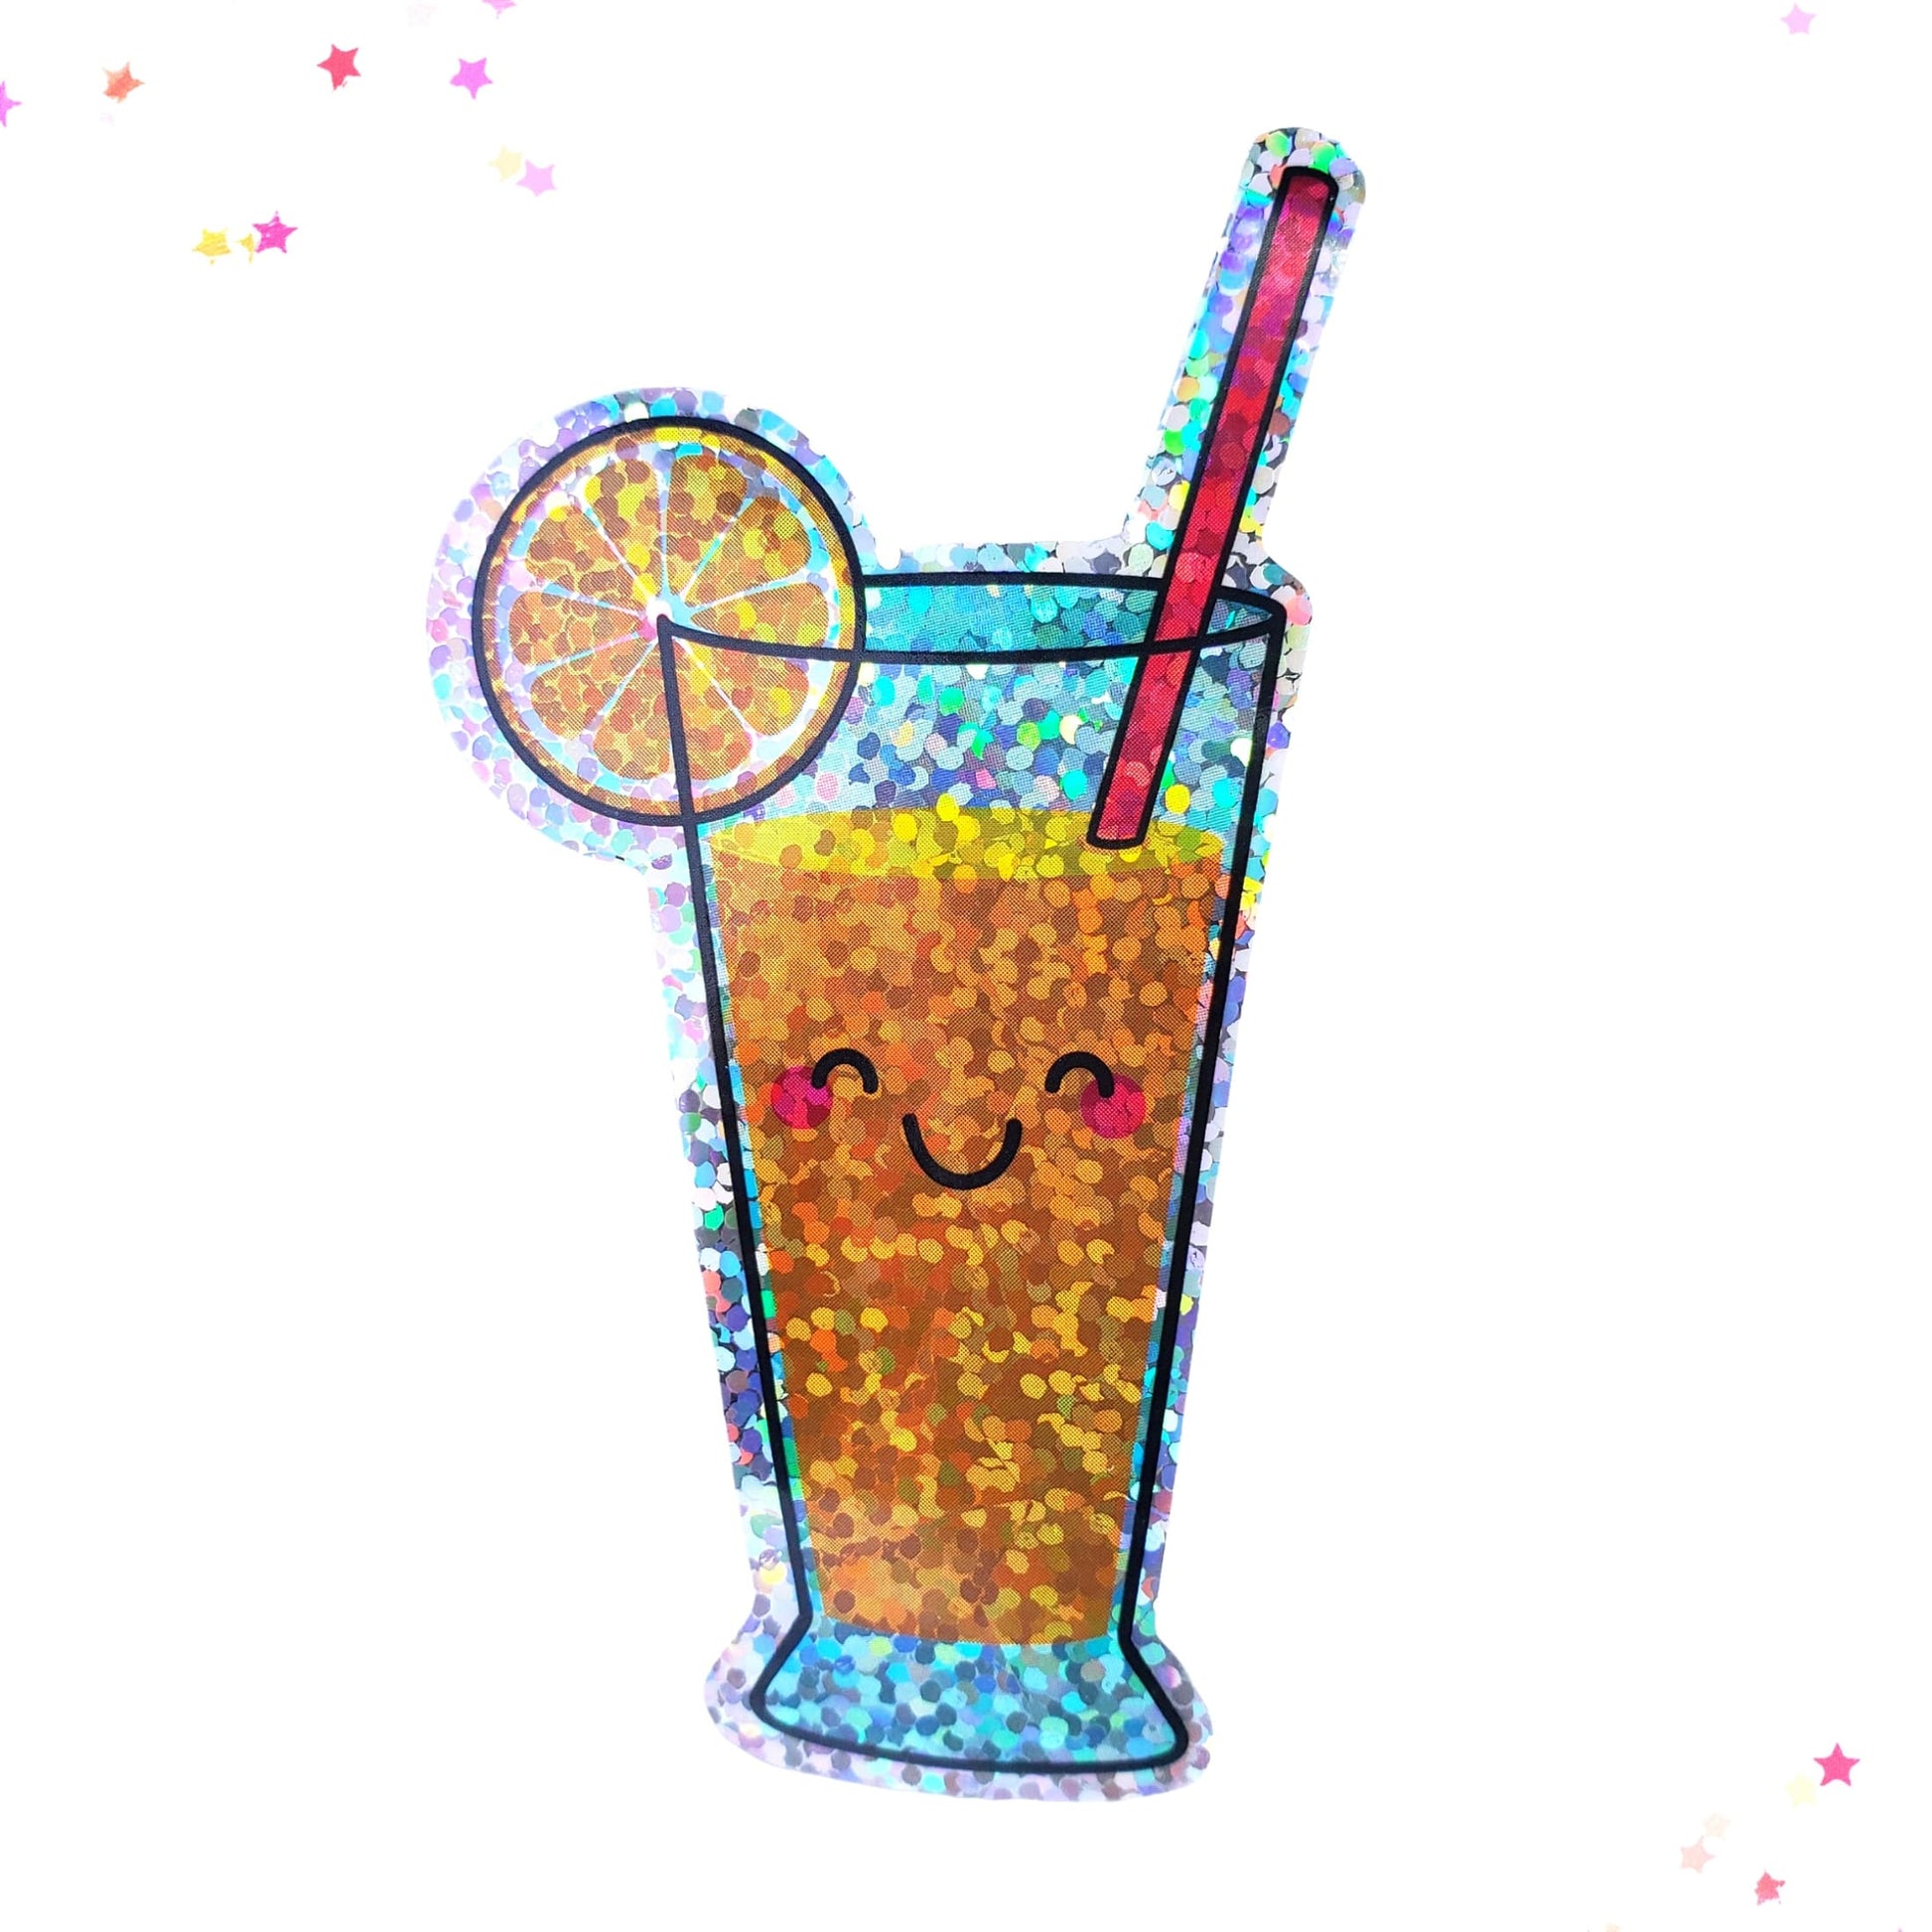 Premium Sticker - Sparkly Holographic Glitter Happy Orange Drink from Confetti Kitty, Only 2.0